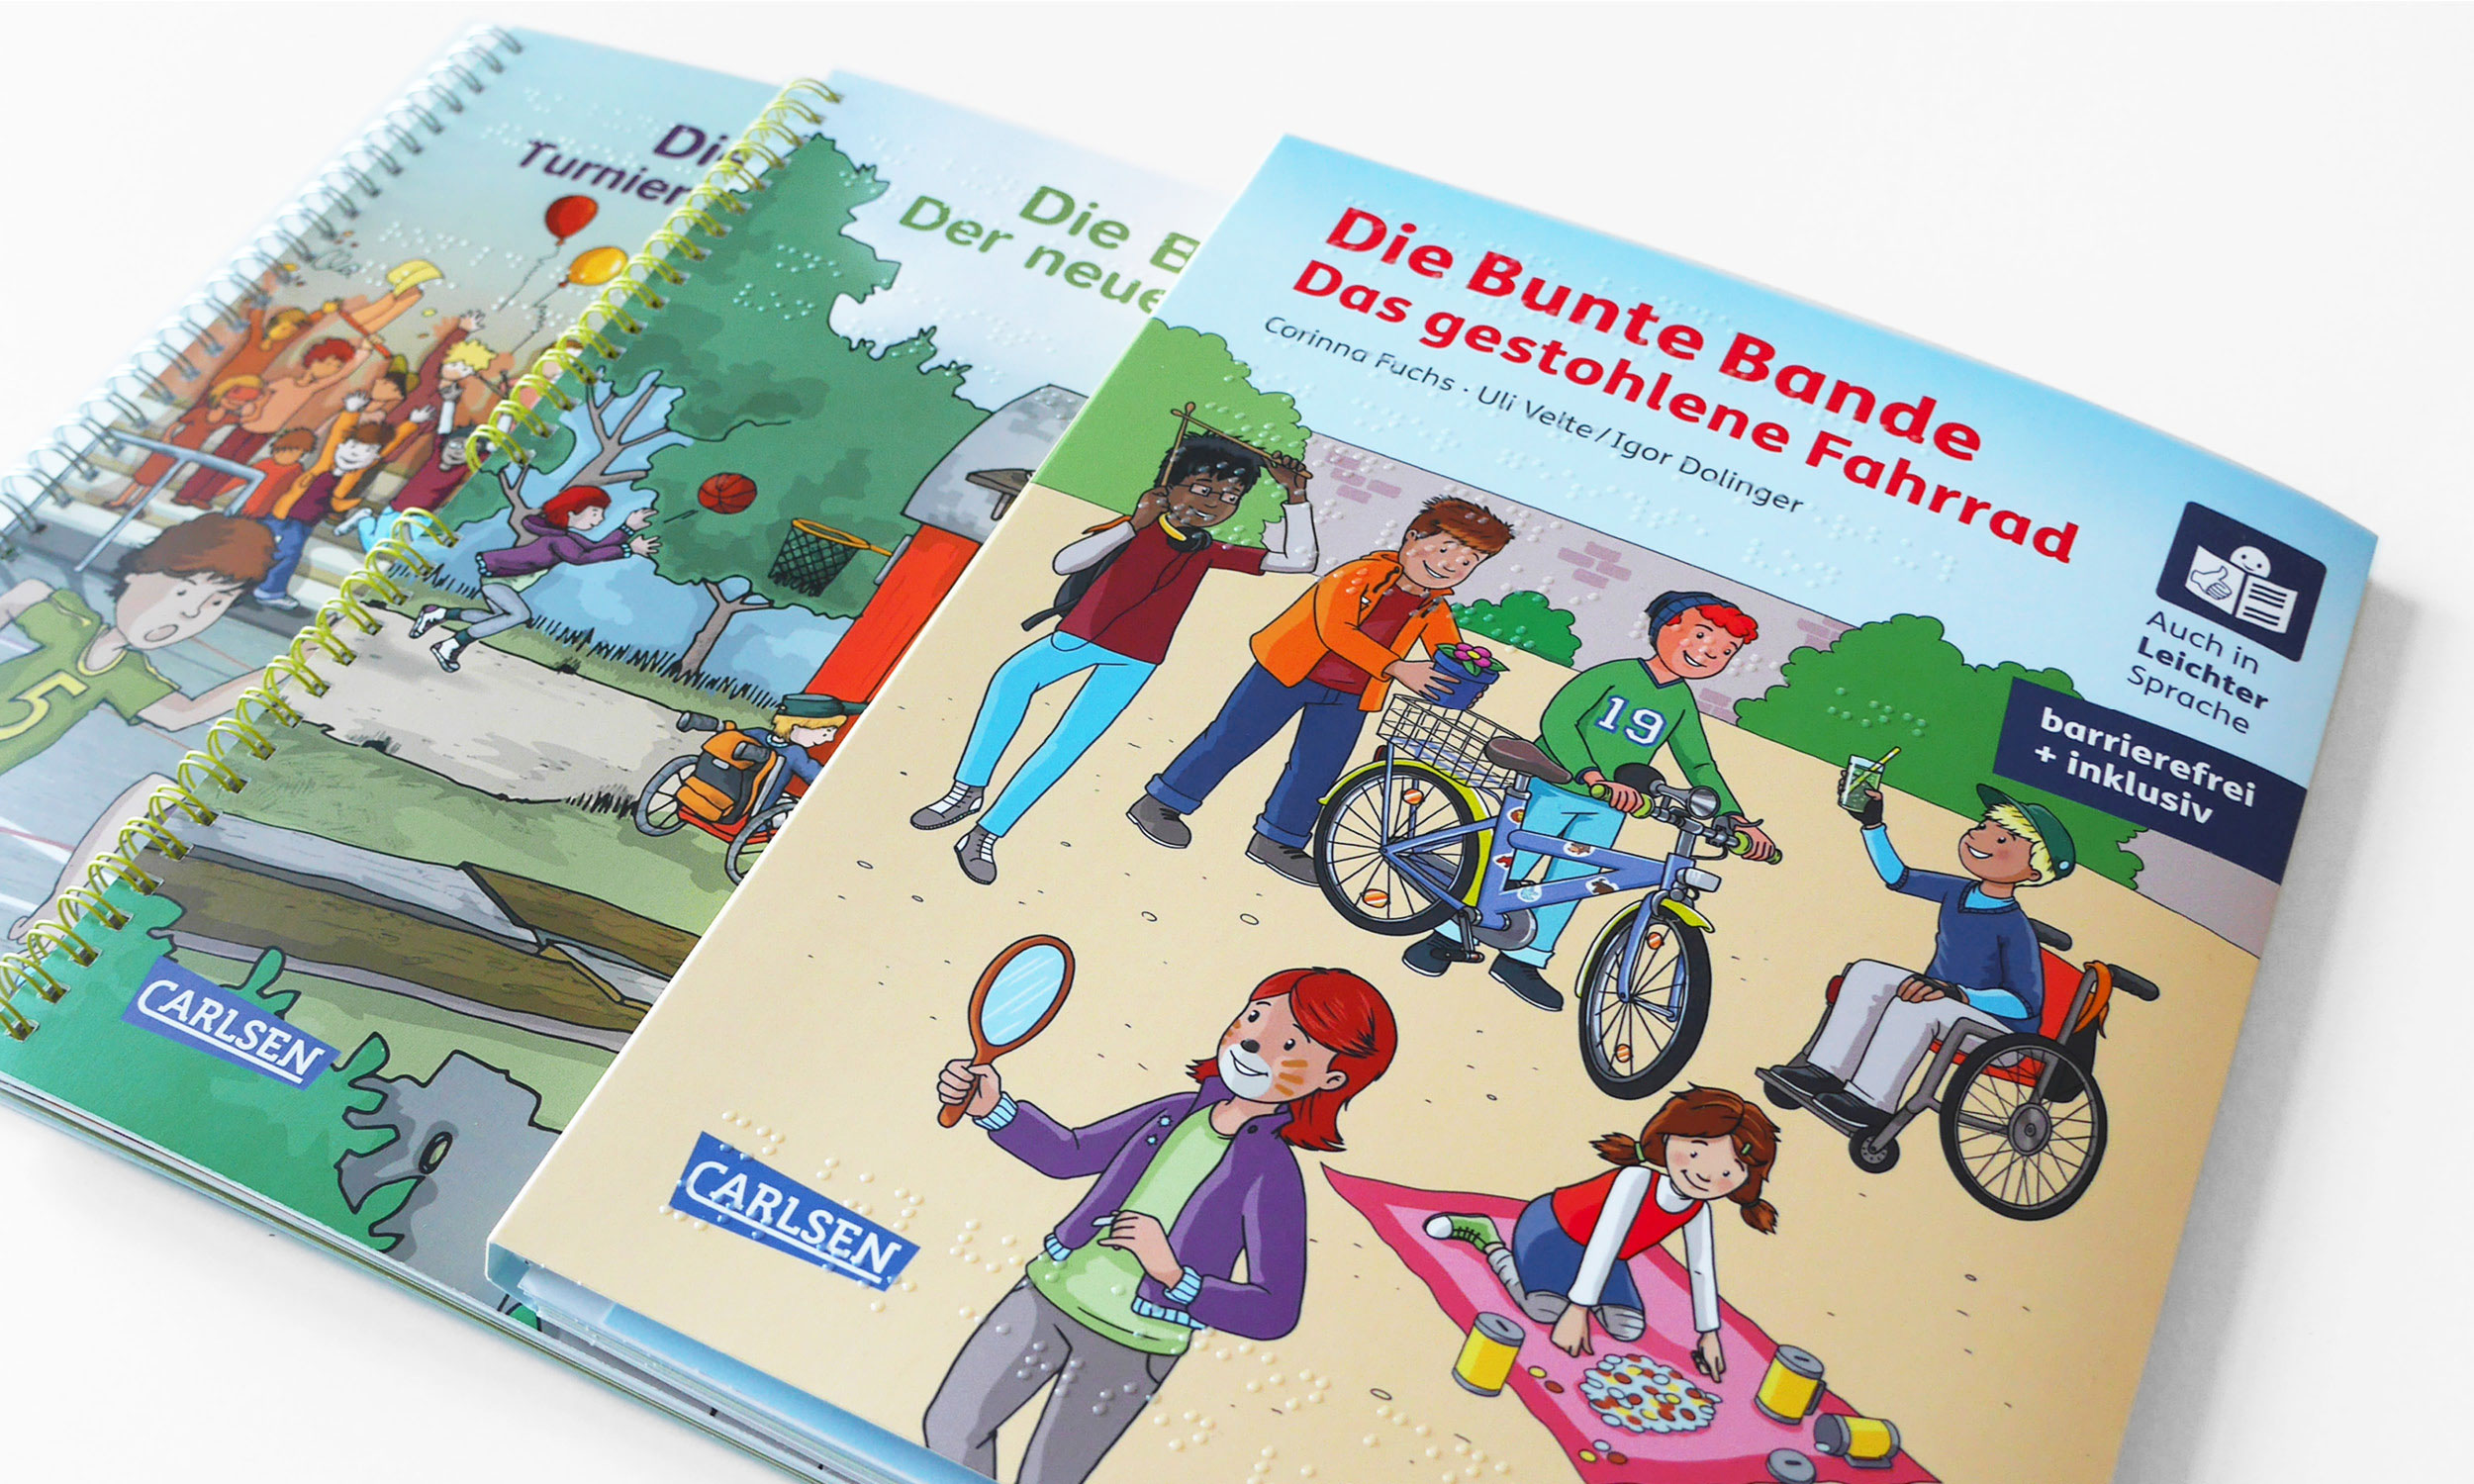 In a row, the issue of the Bunte Bande \"Das gestohlene Fahrrad\" (The Stolen Bicycle) lies next to other subsequently inclusive issues of the Bunte Bande.